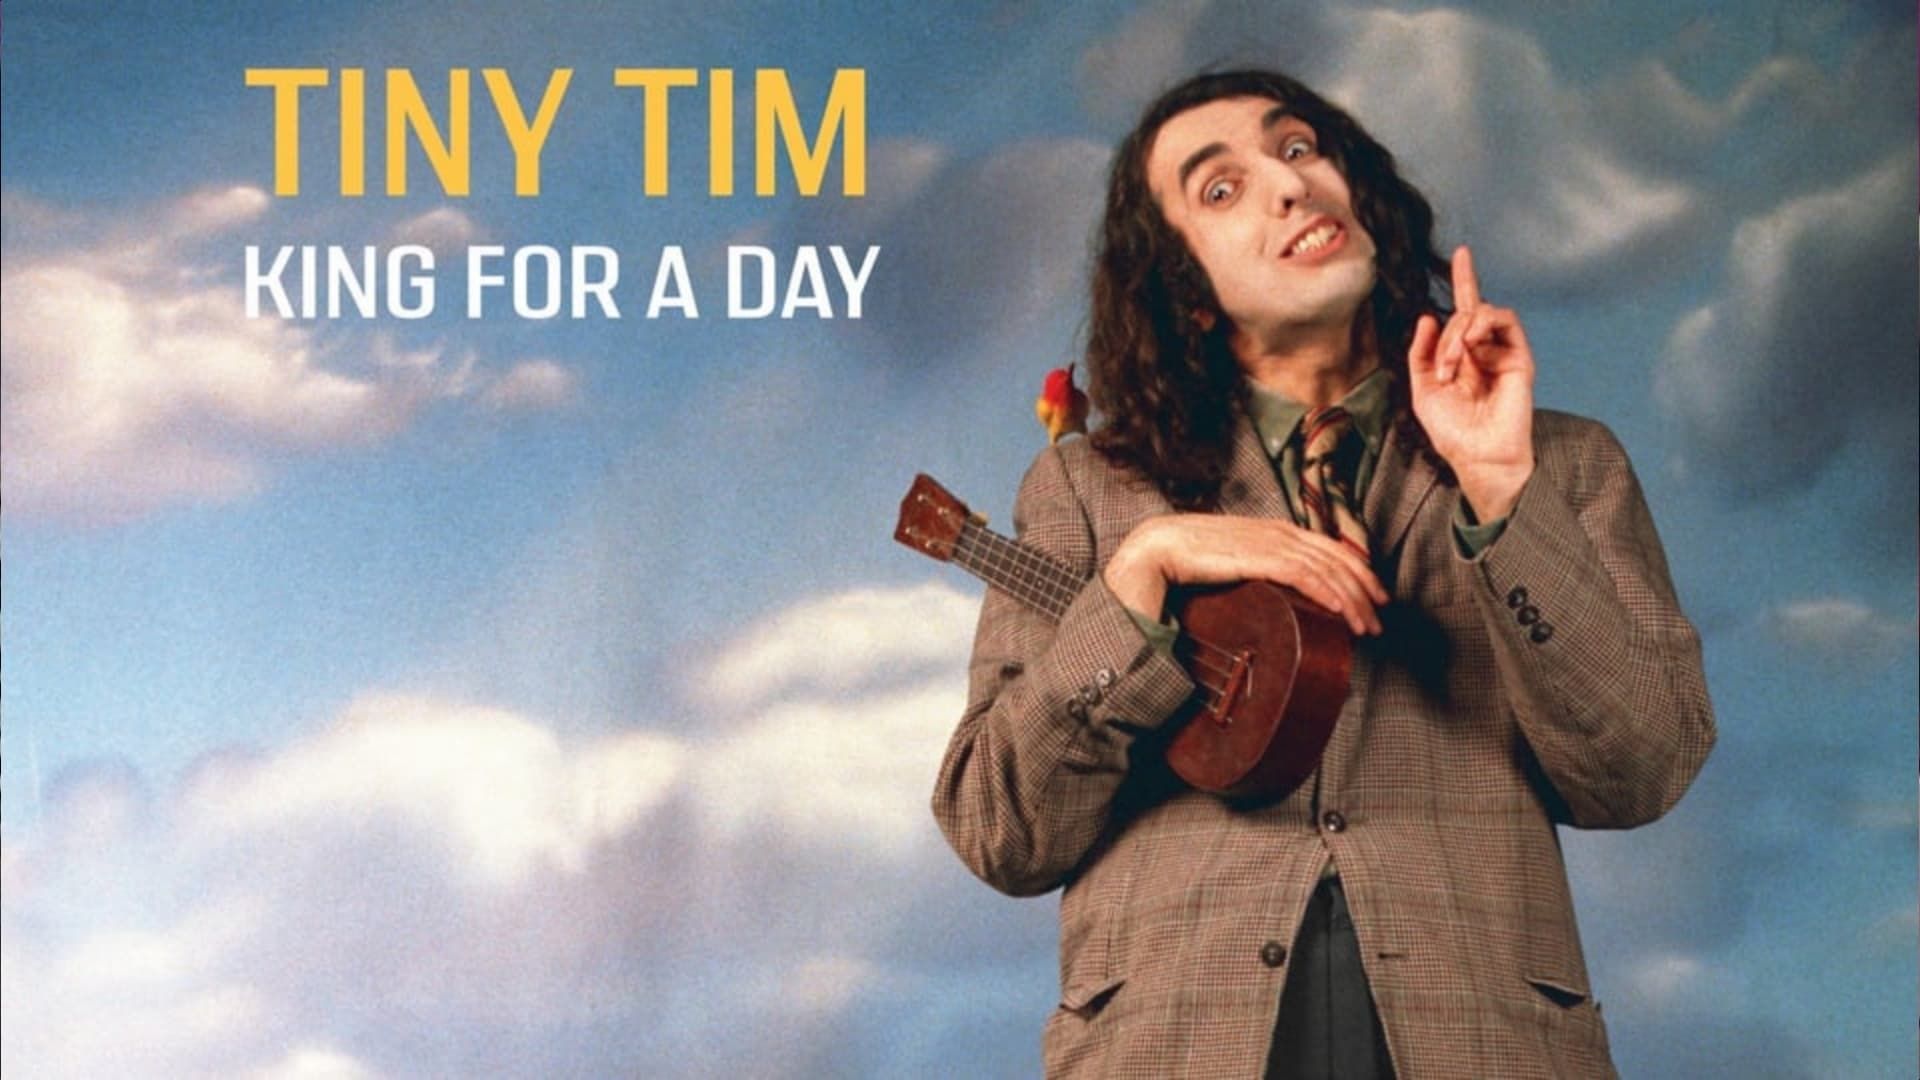 Tiny Tim: King for a Day background